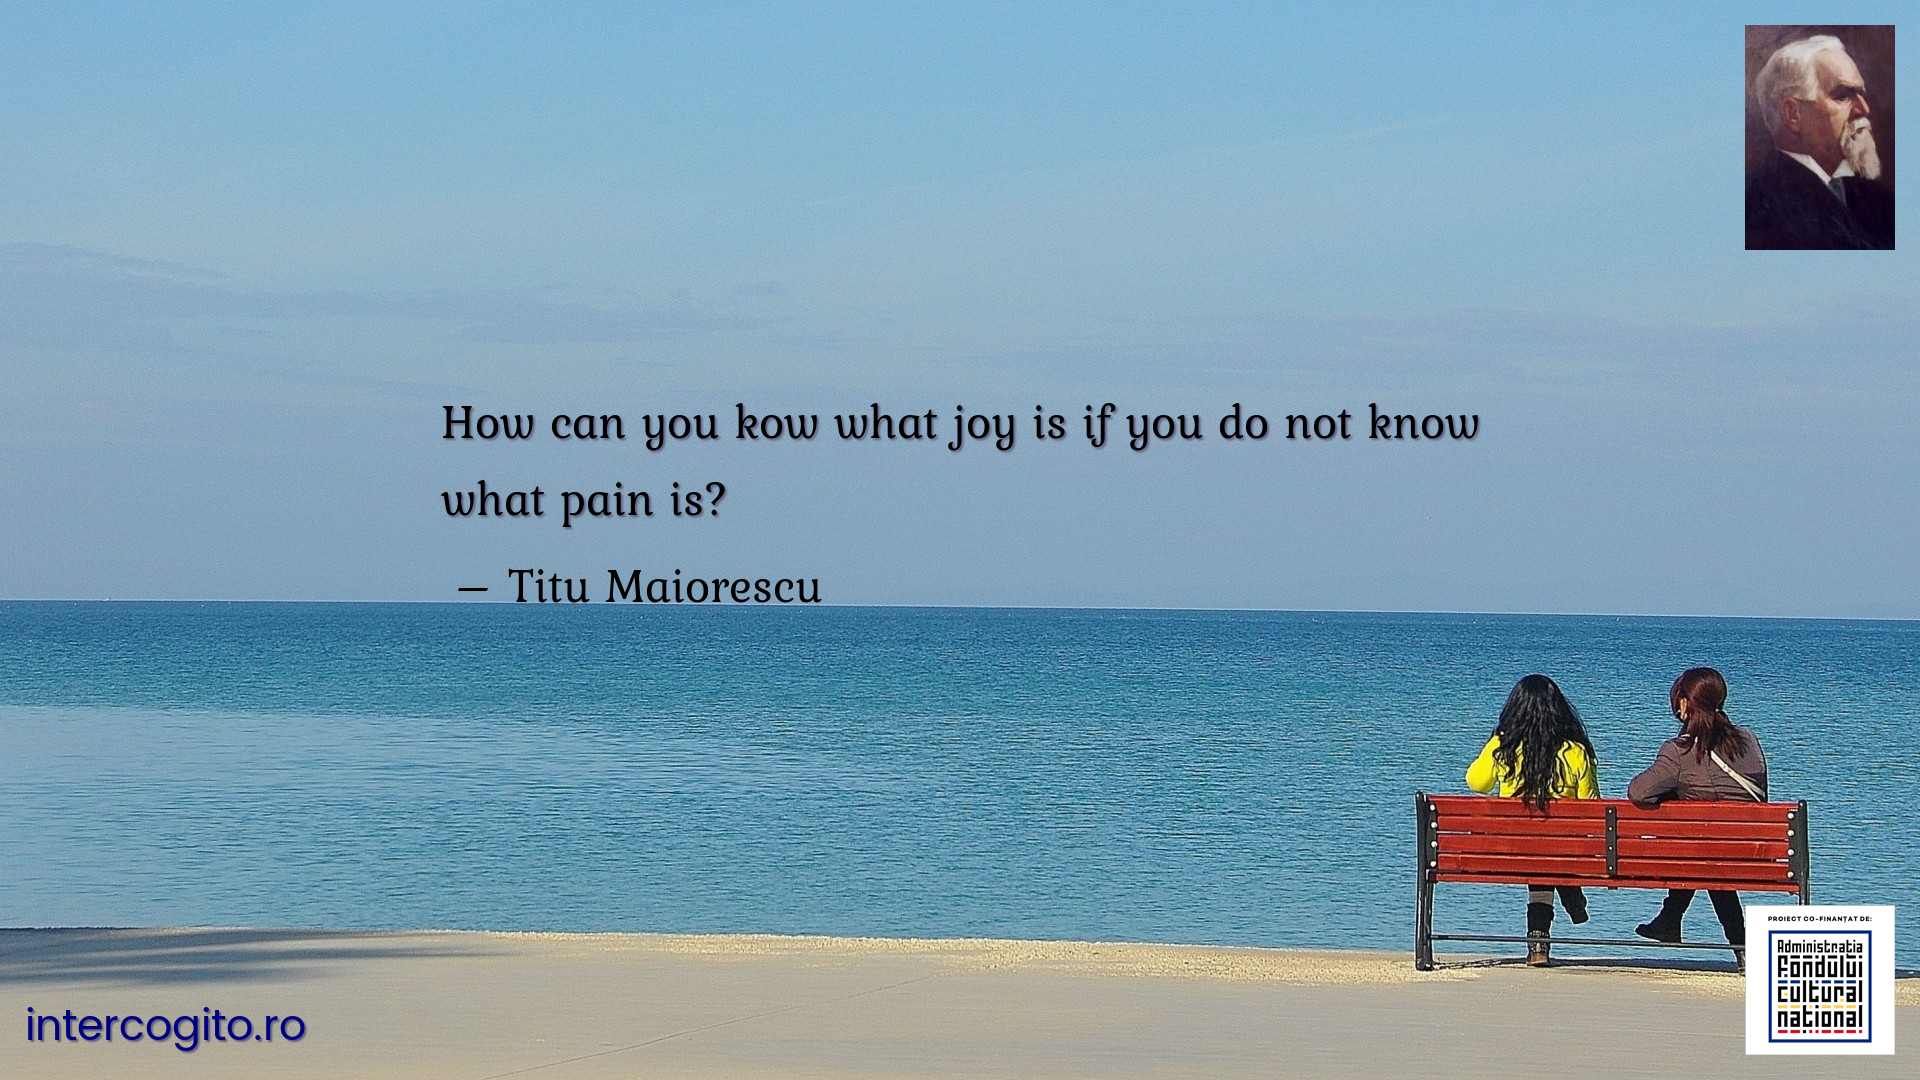 How can you kow what joy is if you do not know what pain is?